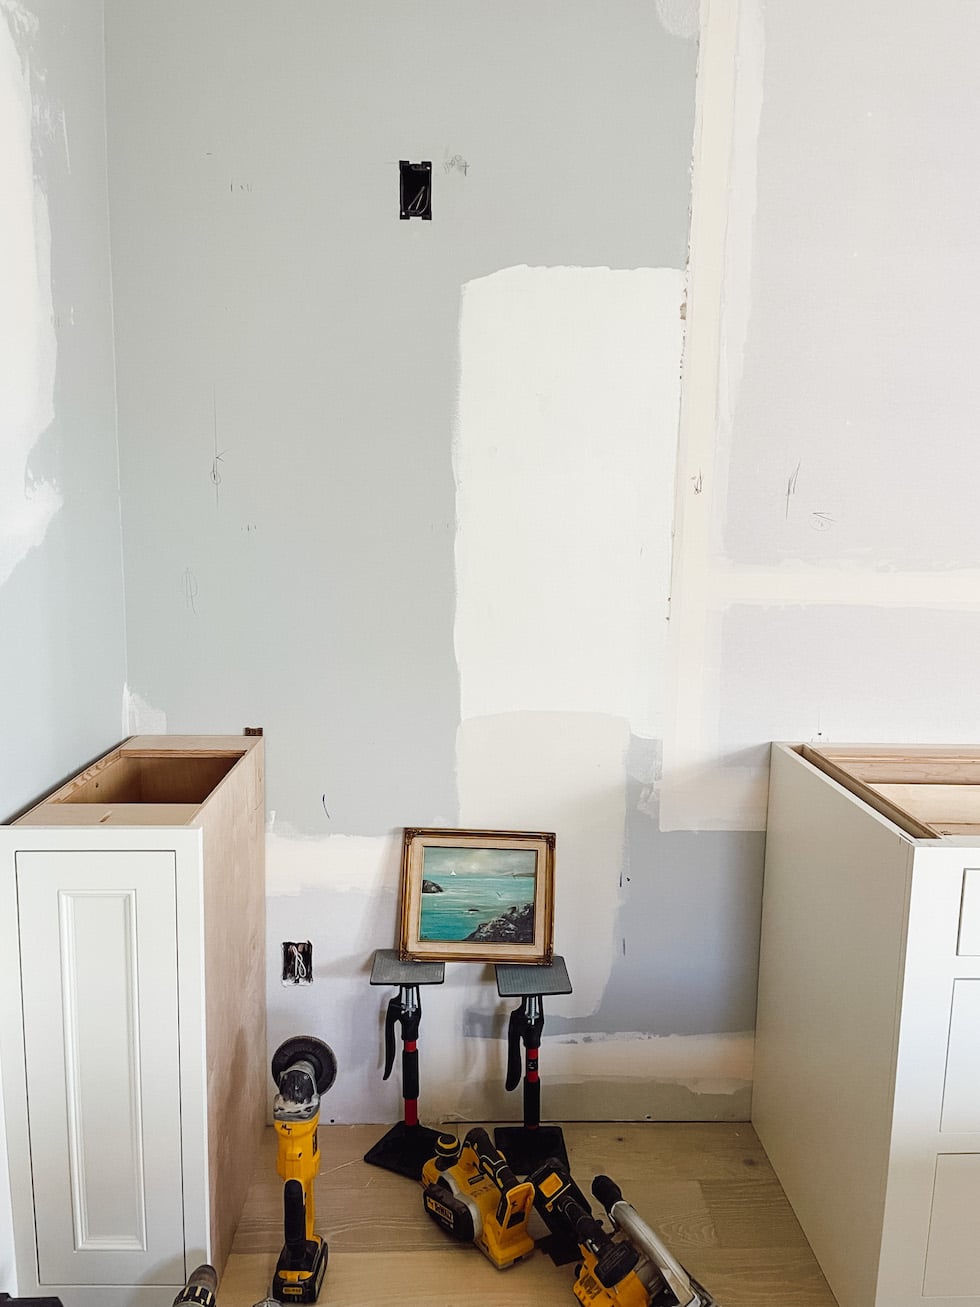 Kitchen Renovation Update: Floors, Cabinets, Sink, Hardware and More!